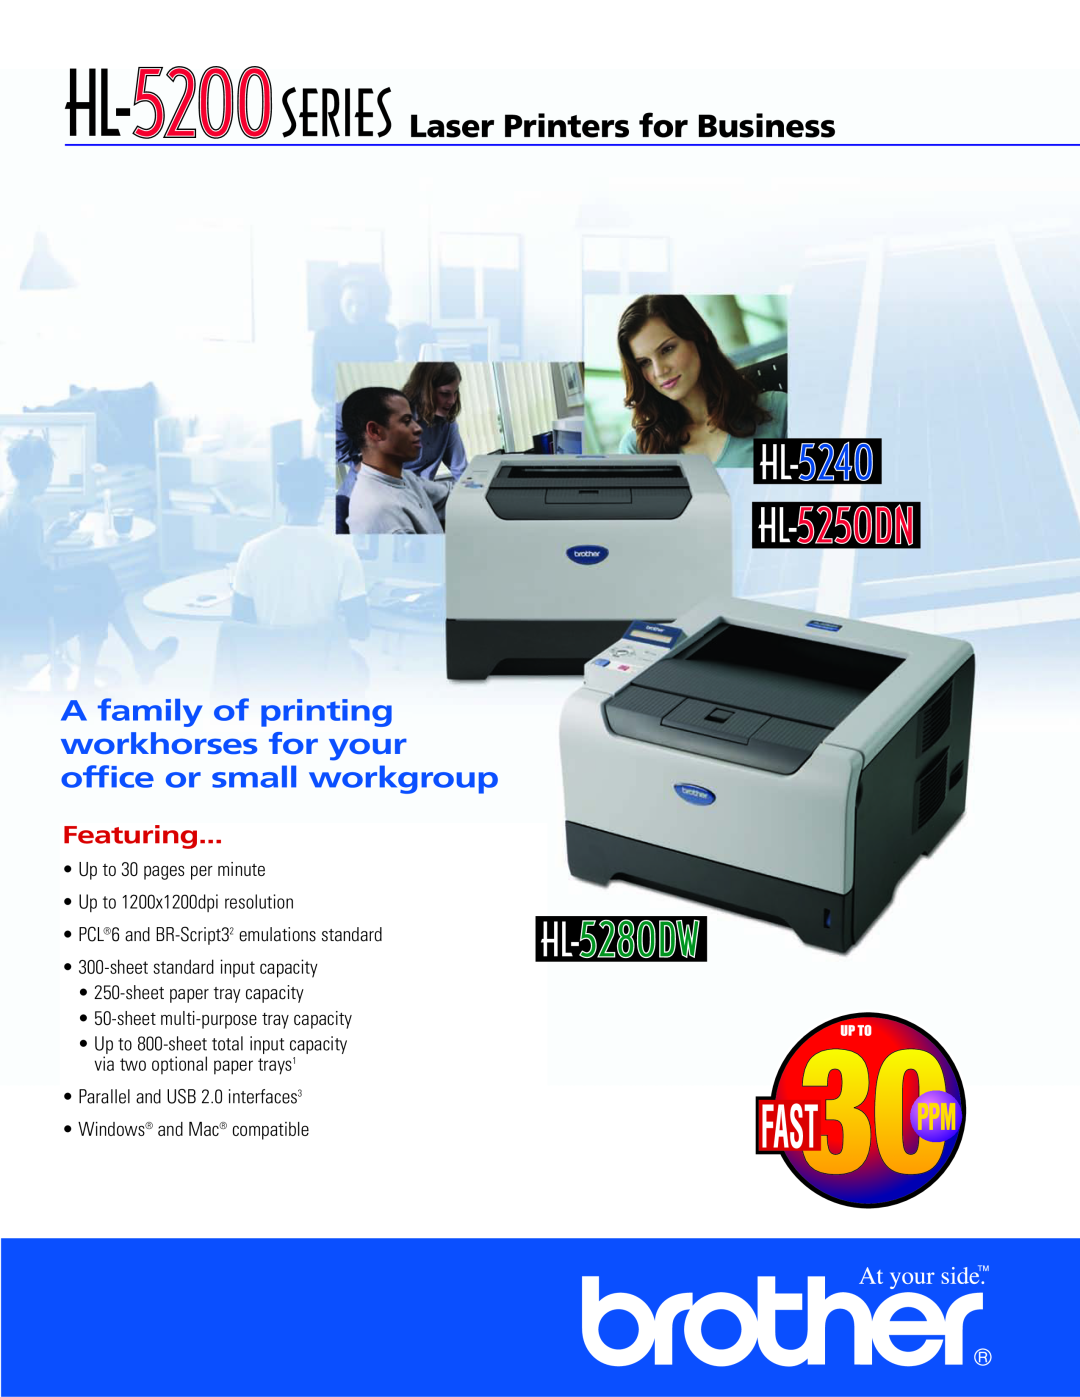 Brother HL-5280DW manual A family of printing workhorses for your office or small workgroup, Featuring 